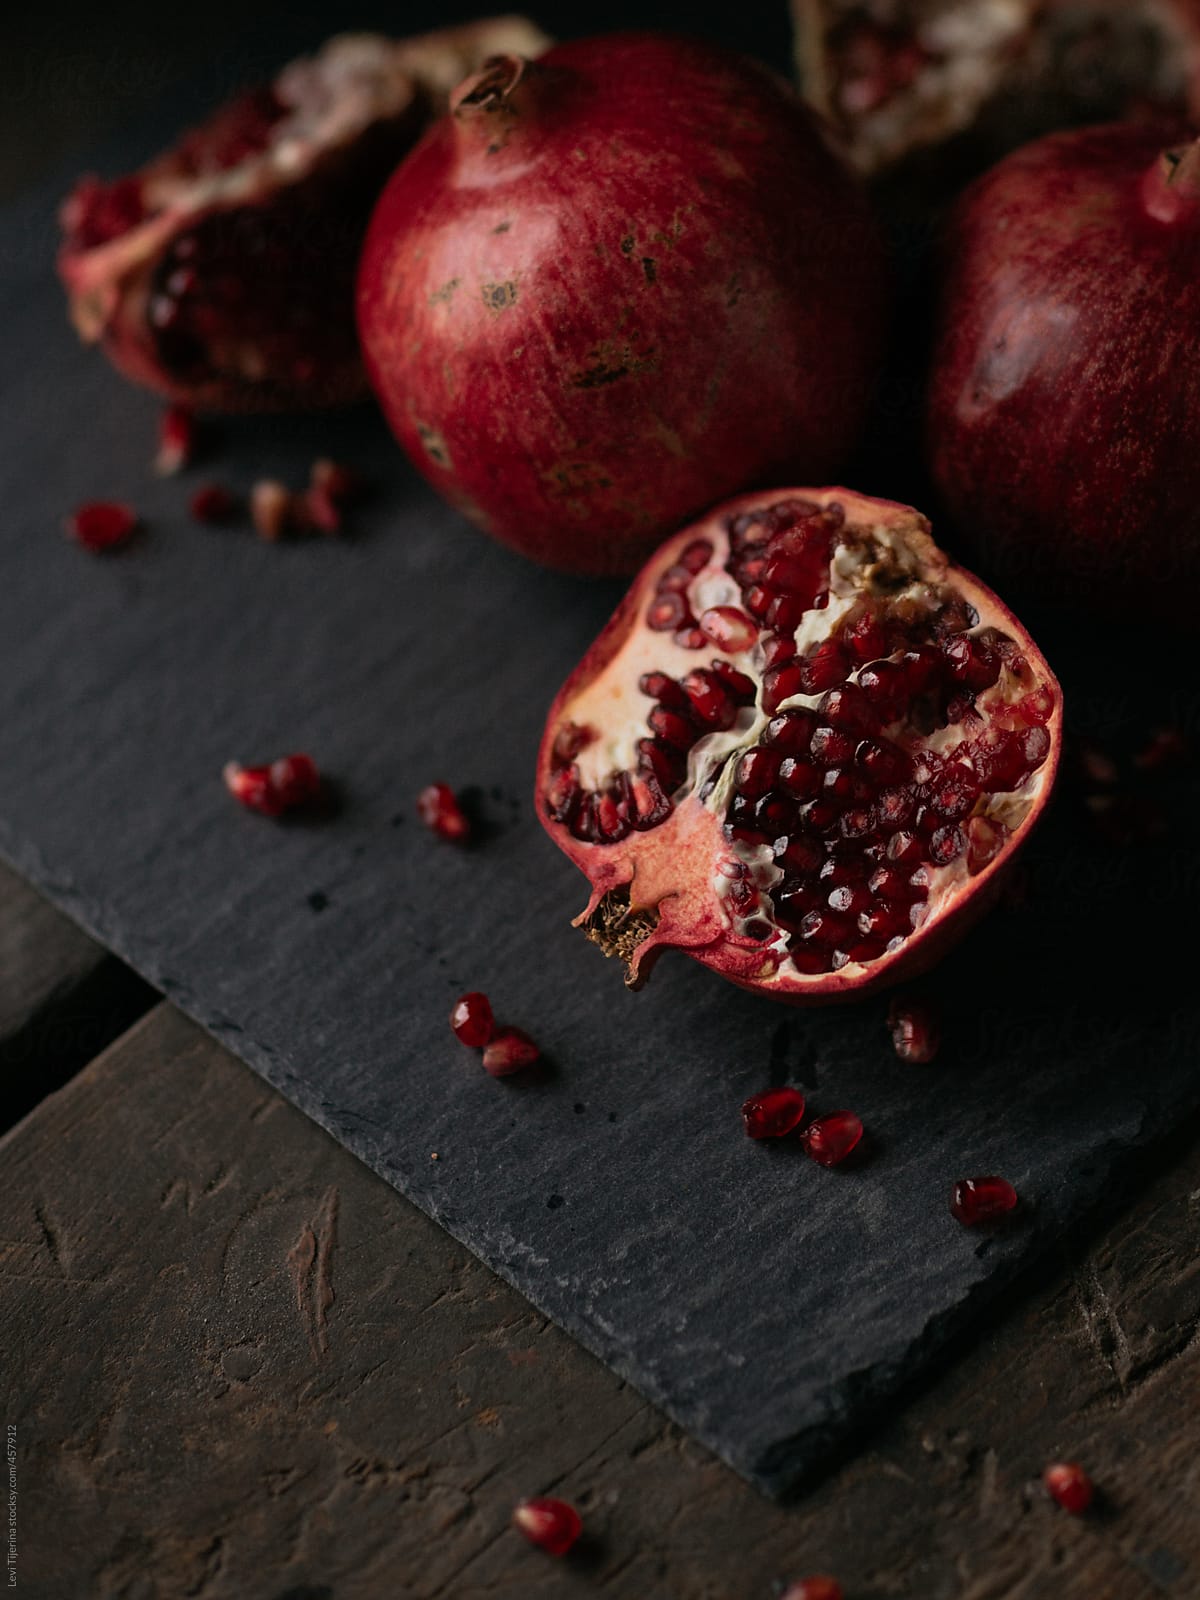 pomegranate and seeds freshly opened on wooden kitchen farm table